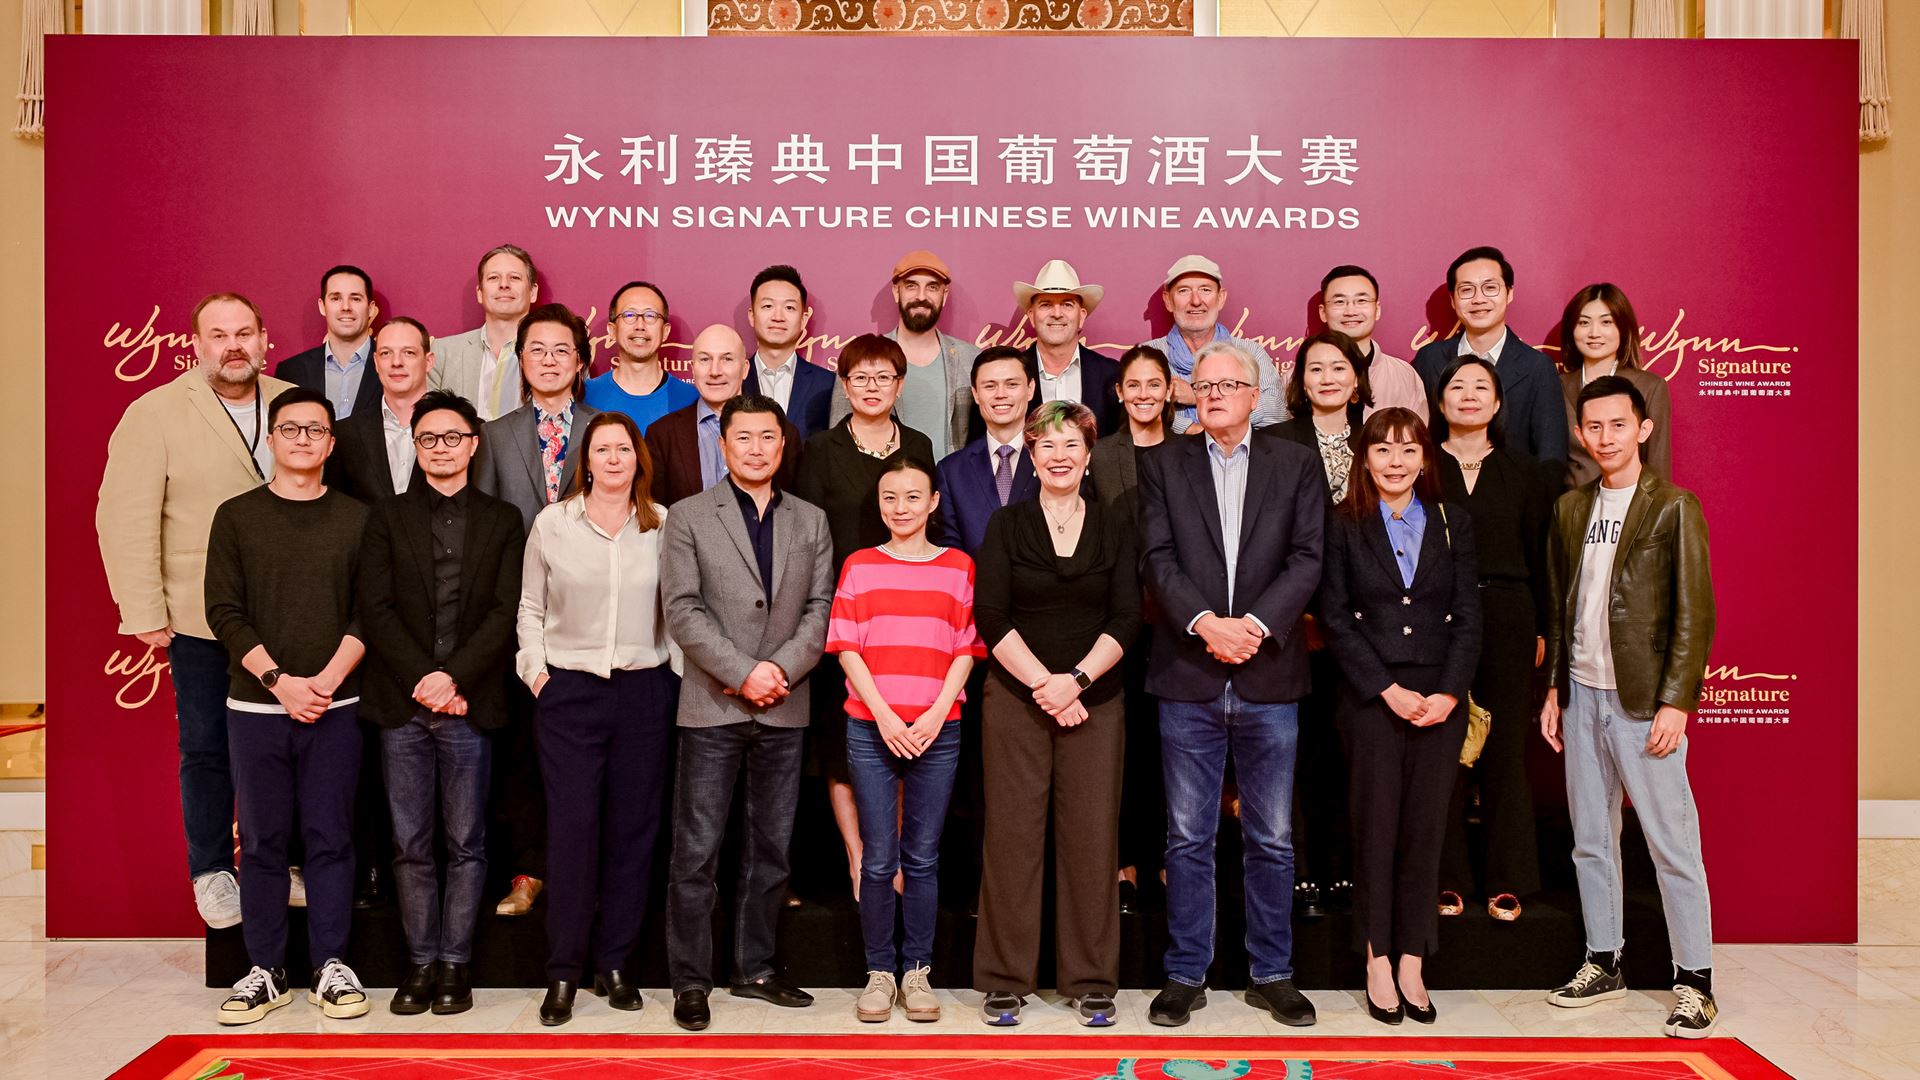 A judging panel comprising 27 globally-recognized wine experts gathered in Macau for the Wynn Signature Chinese Wine Awa